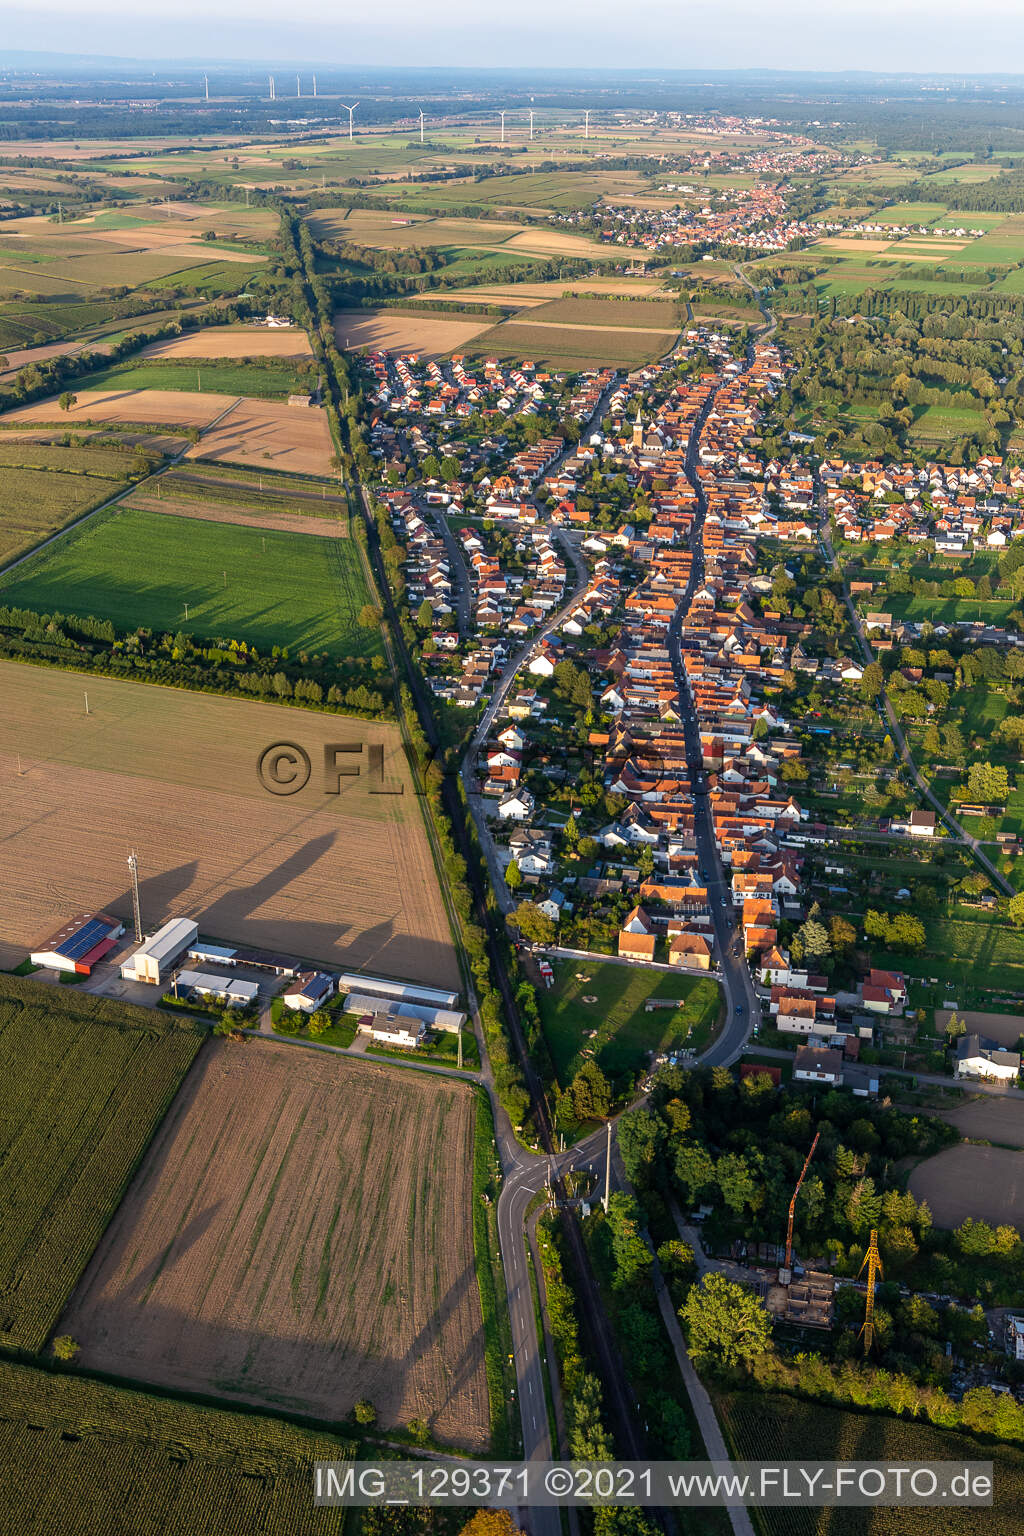 District Schaidt in Wörth am Rhein in the state Rhineland-Palatinate, Germany from the drone perspective